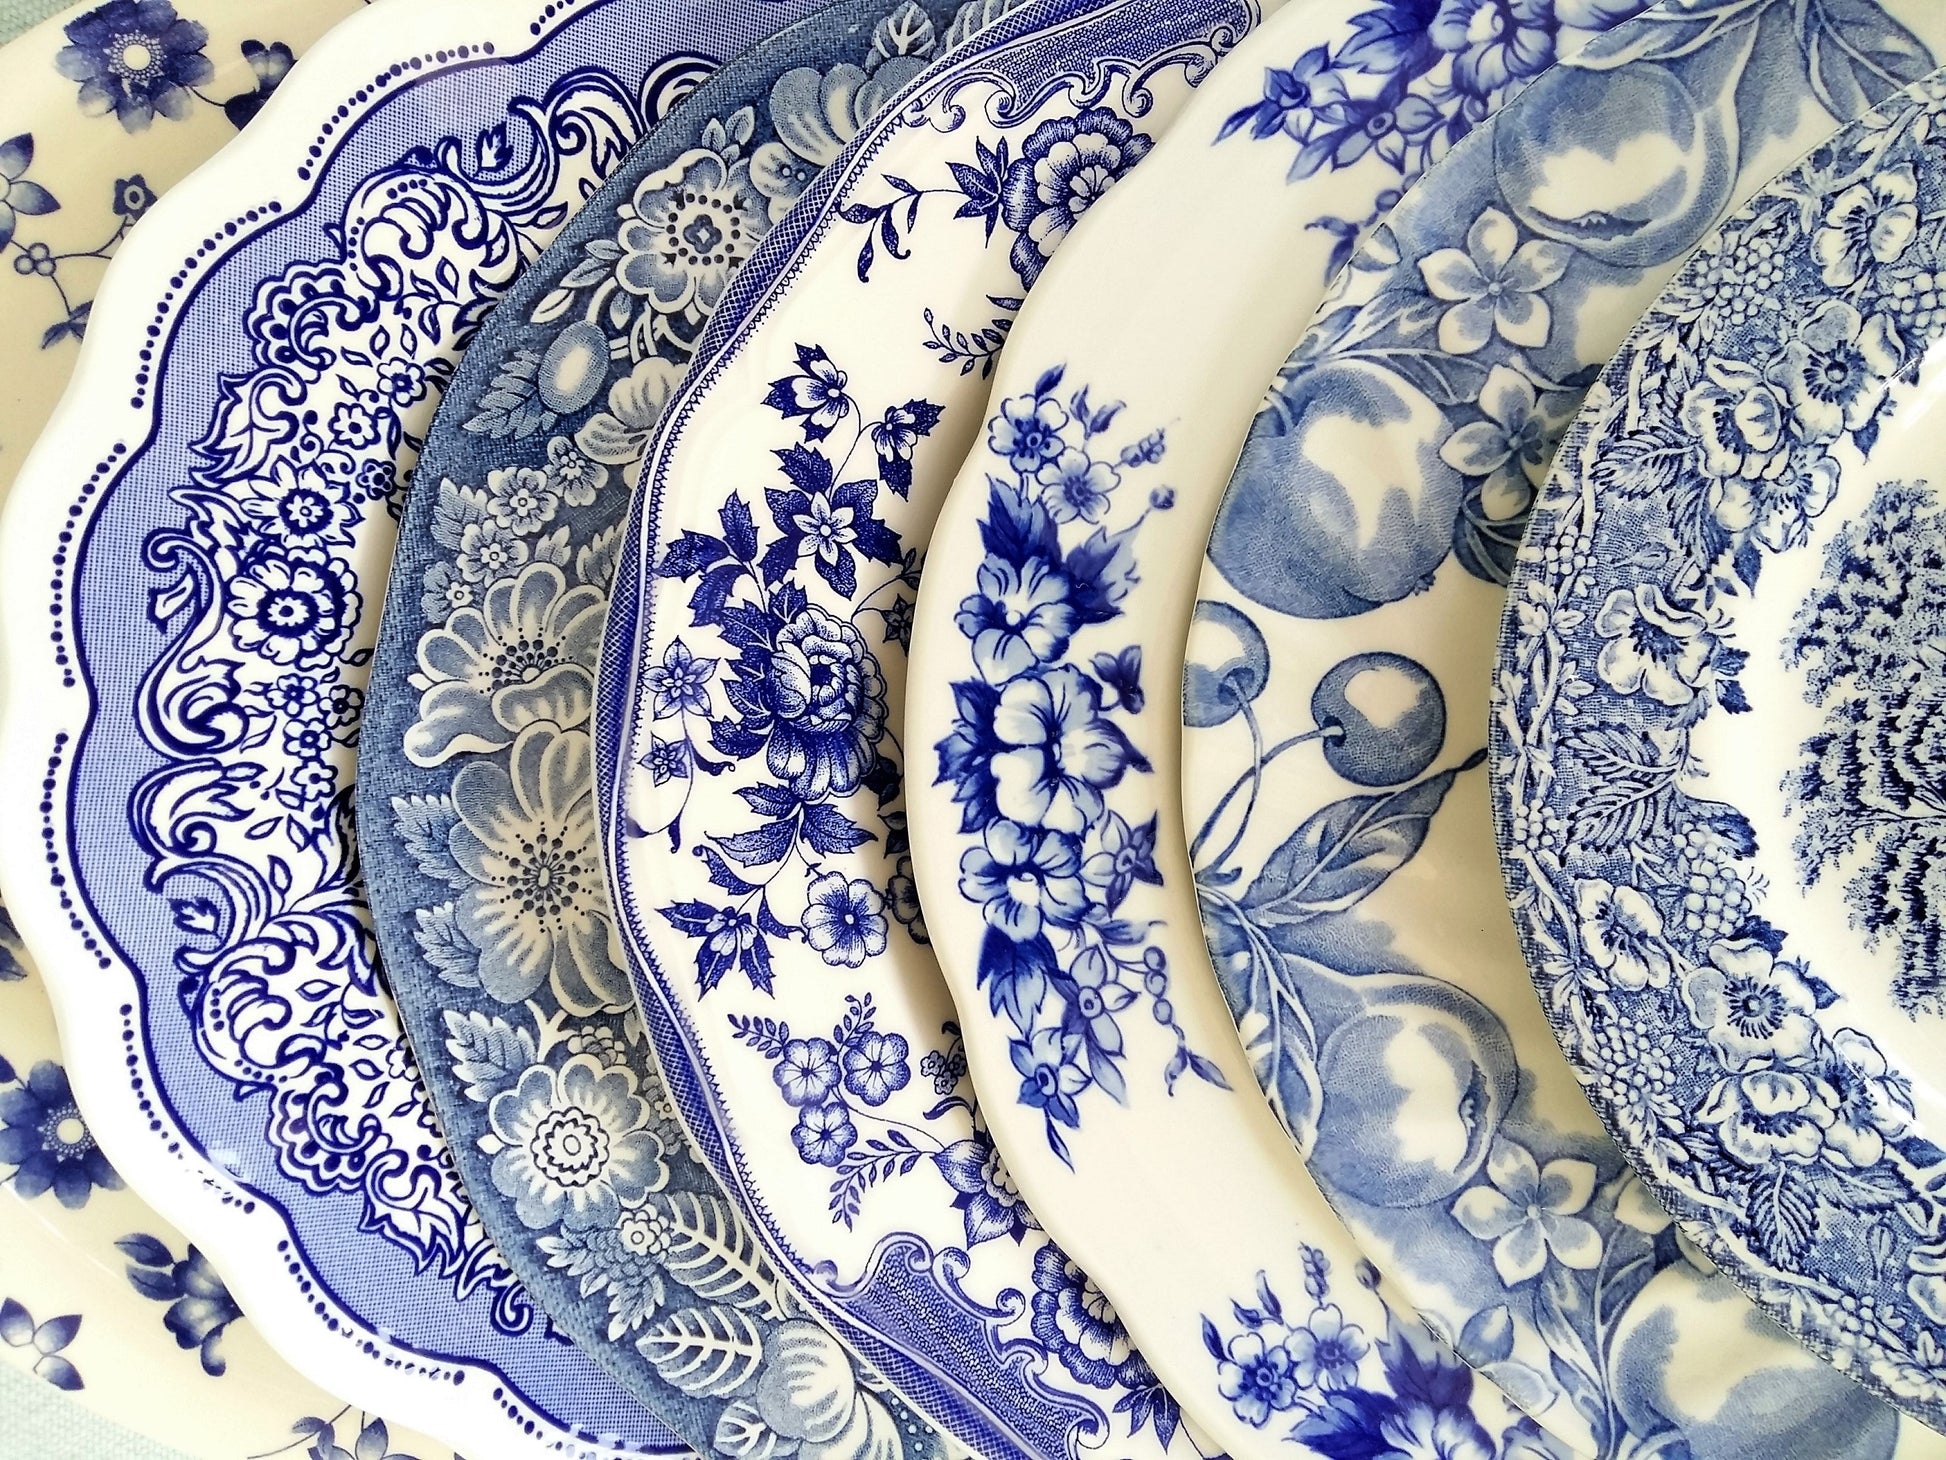 EIGHT Mismatched Blue and White Plates from Tiggy & Pip - €199 with FREE worldwide shipping! Shop now at Tiggy and Pip